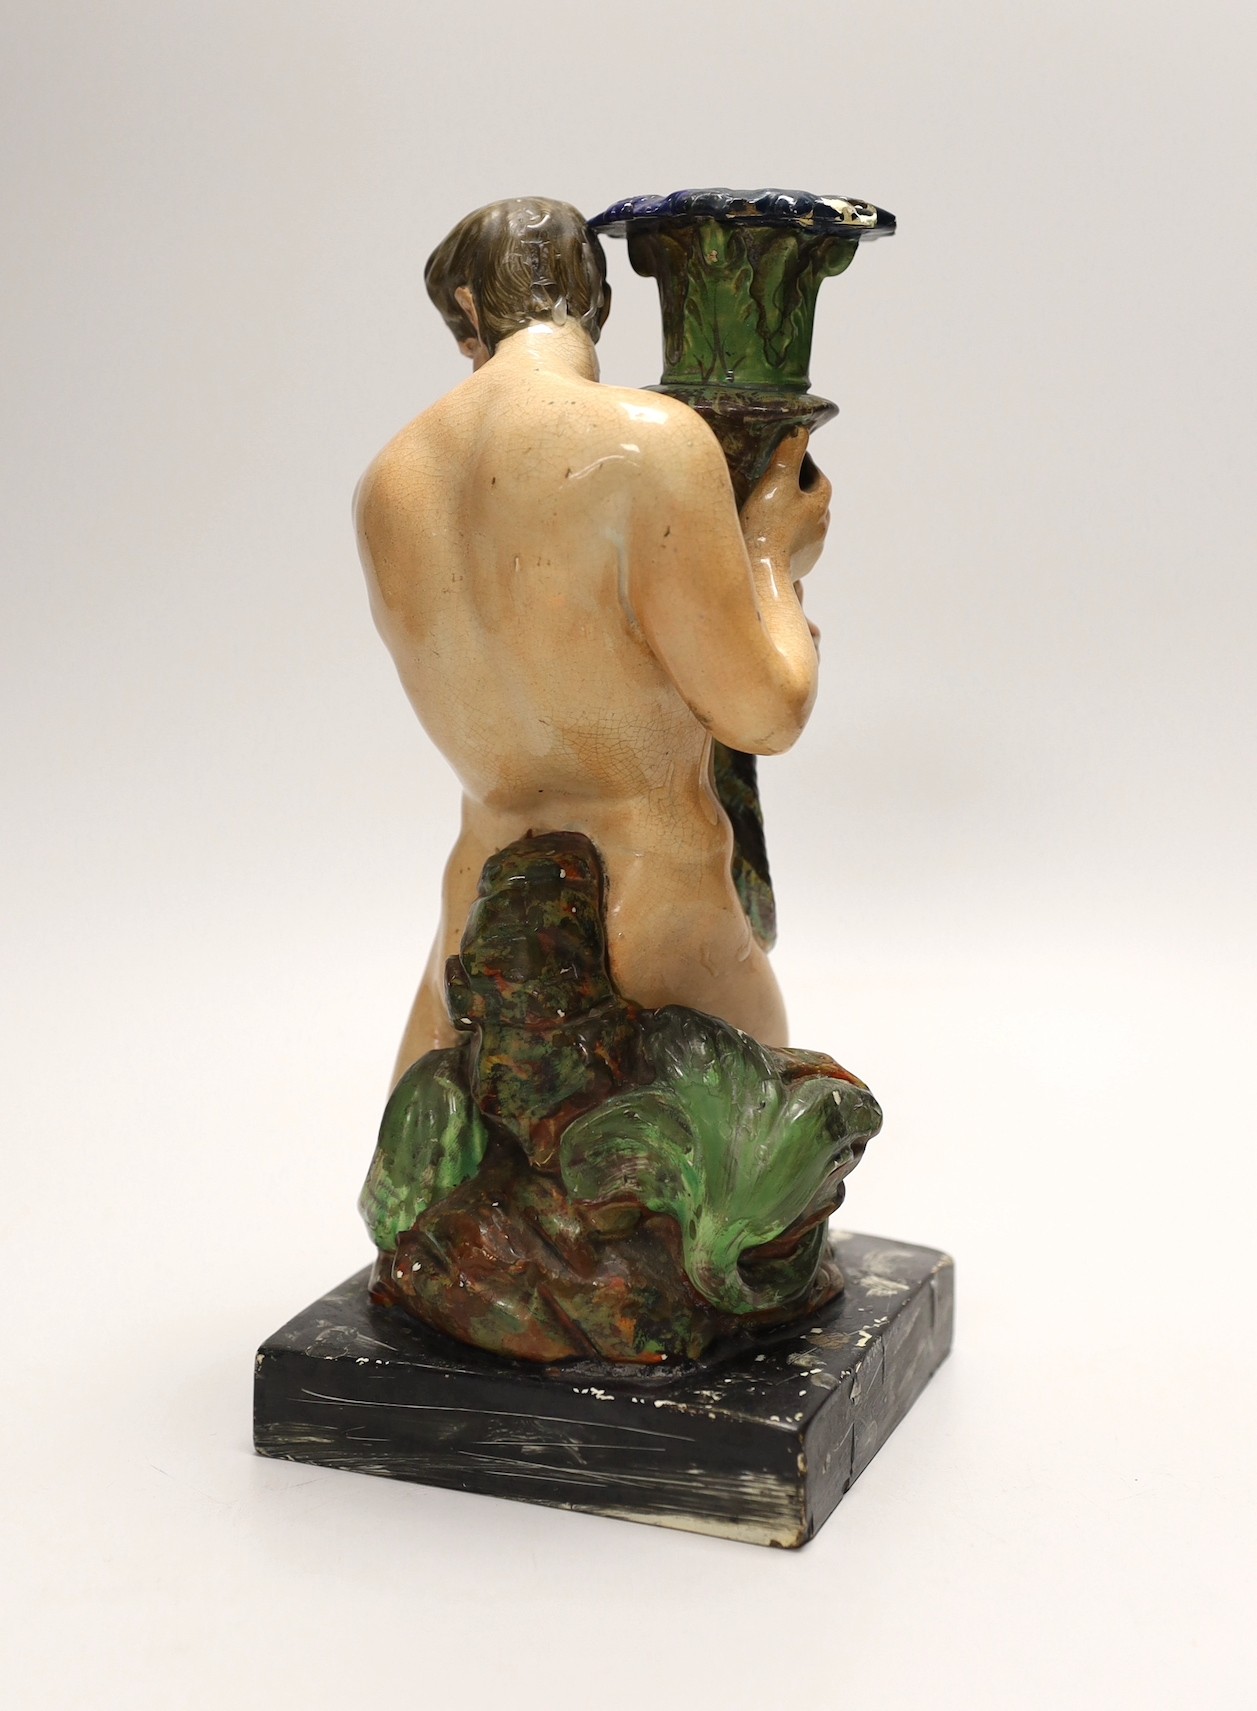 A pearlware ‘Triton’ figural candlestick, attributed to Wood & Caldwell, c.1800, 24cm, after a design by John Flaxman